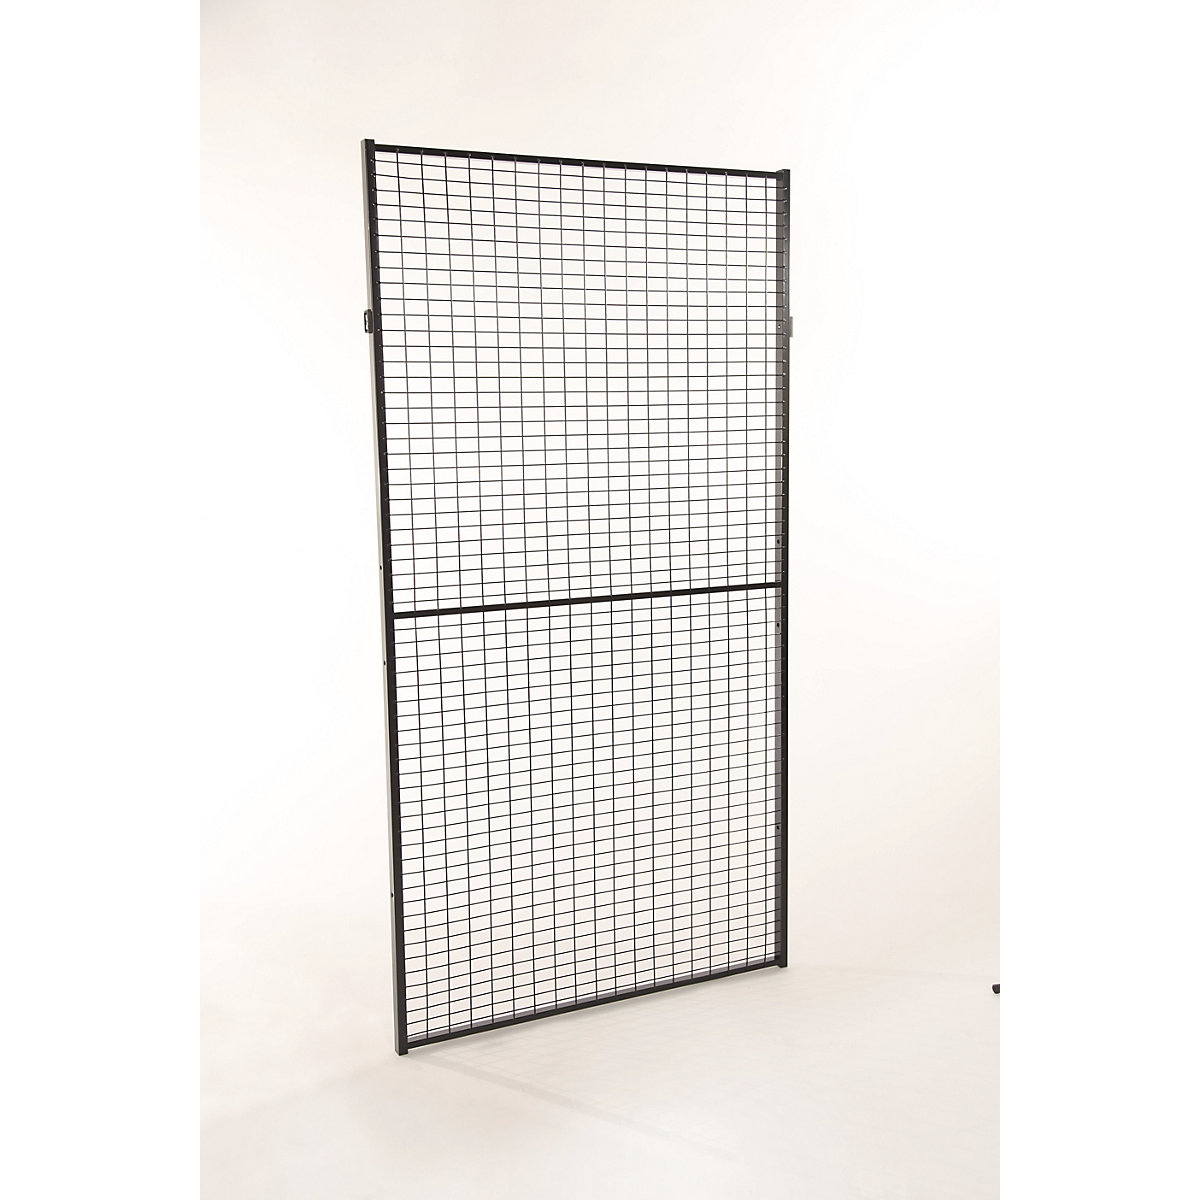 X-GUARD CLASSIC machine protective fencing, wall section – Axelent, height 2200 mm, width 800 mm-10